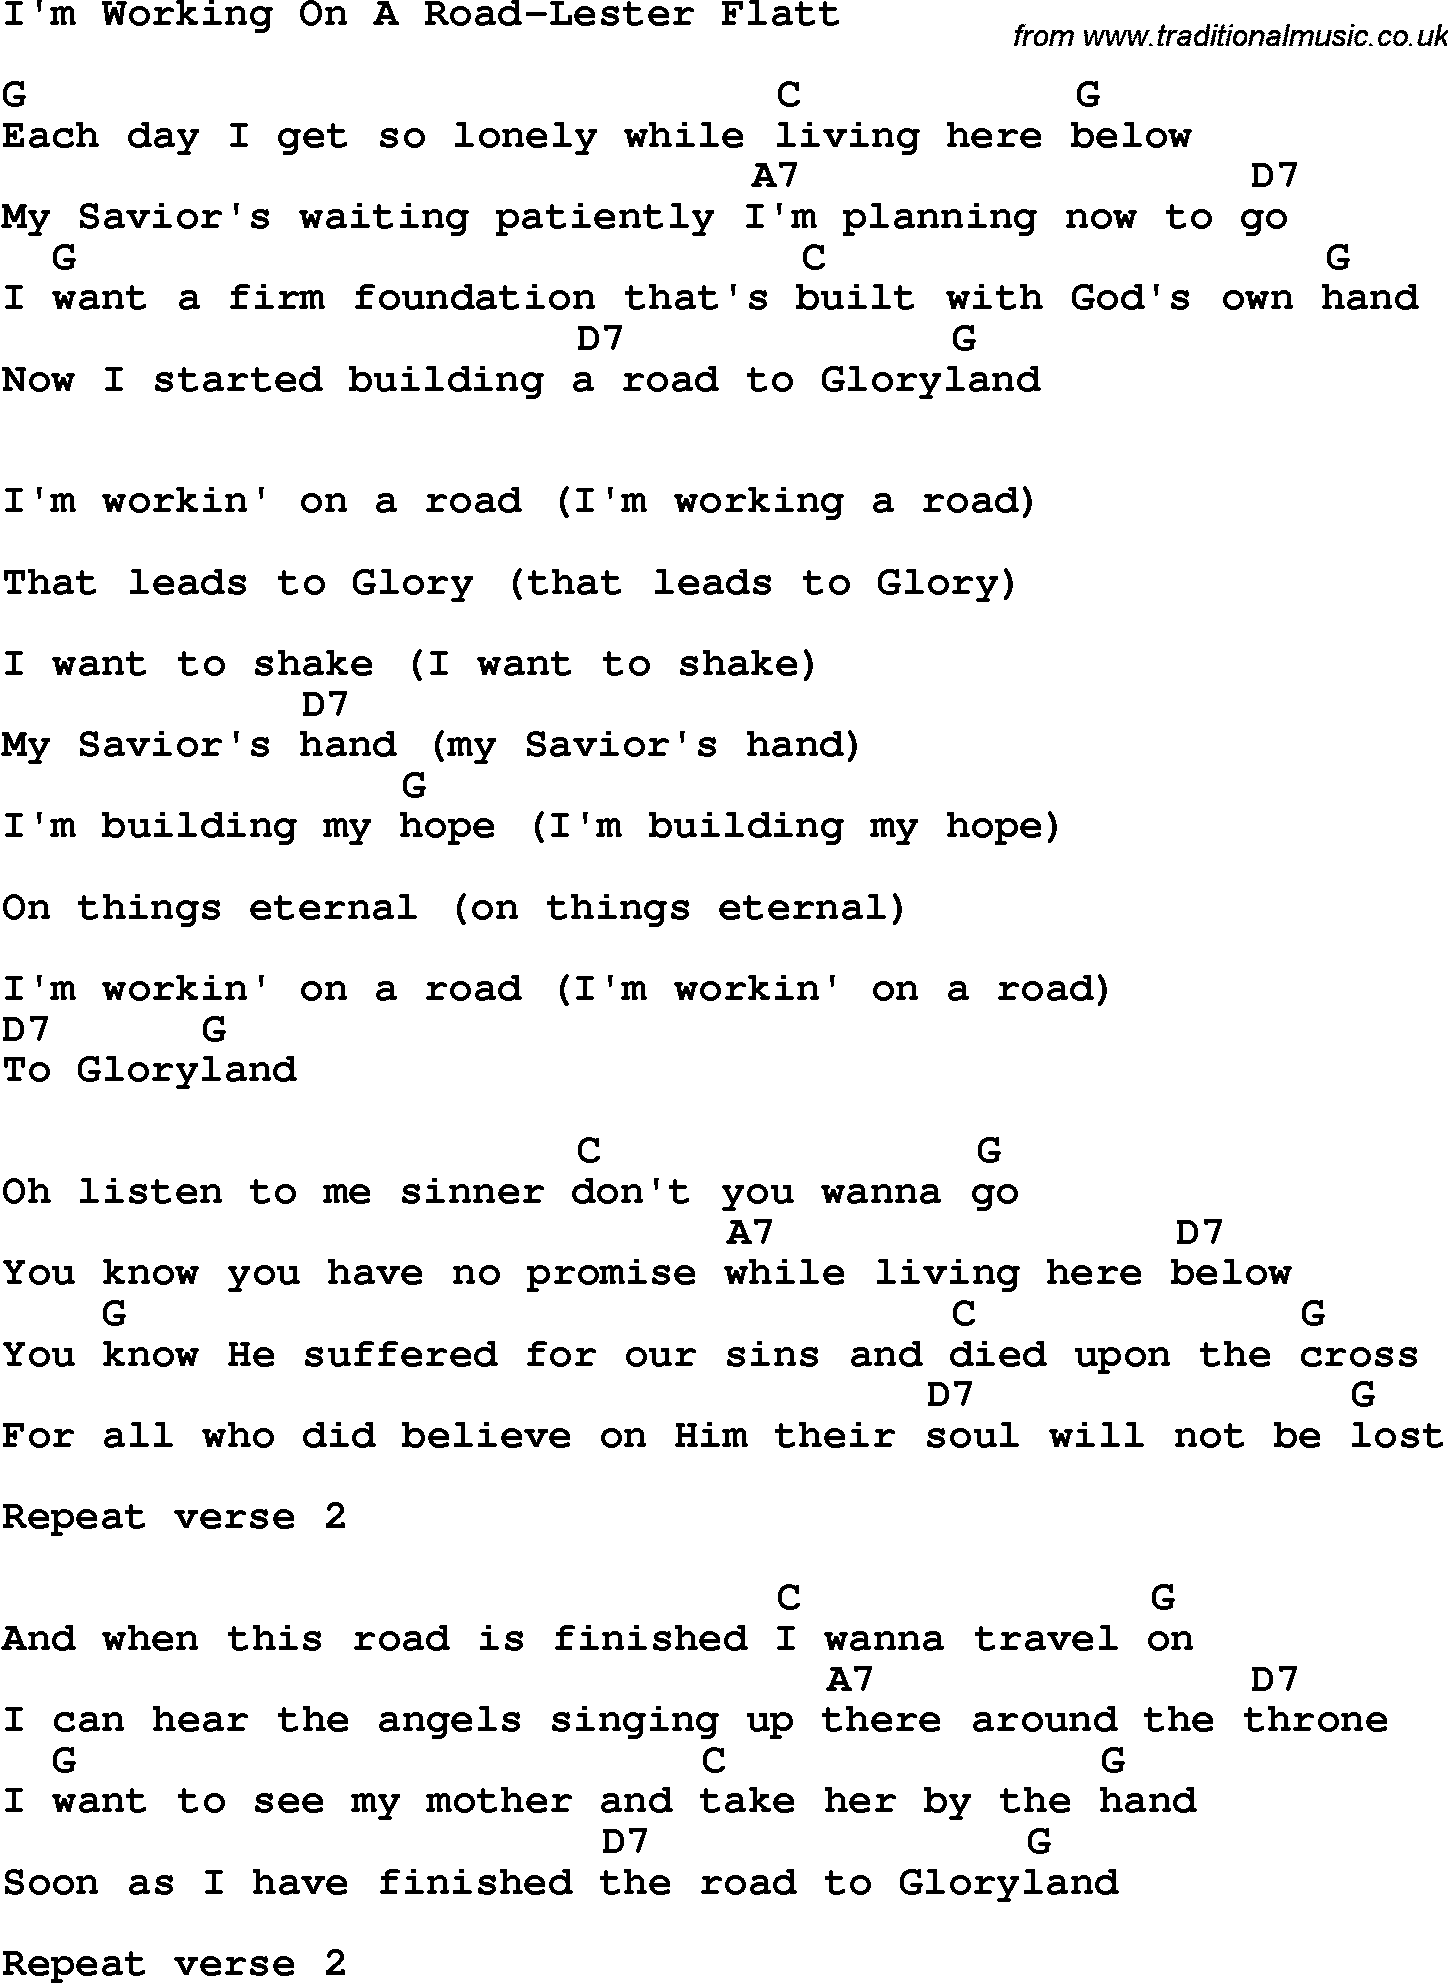 Country, Southern and Bluegrass Gospel Song I'm Working On A Road-Lester Flatt lyrics and chords